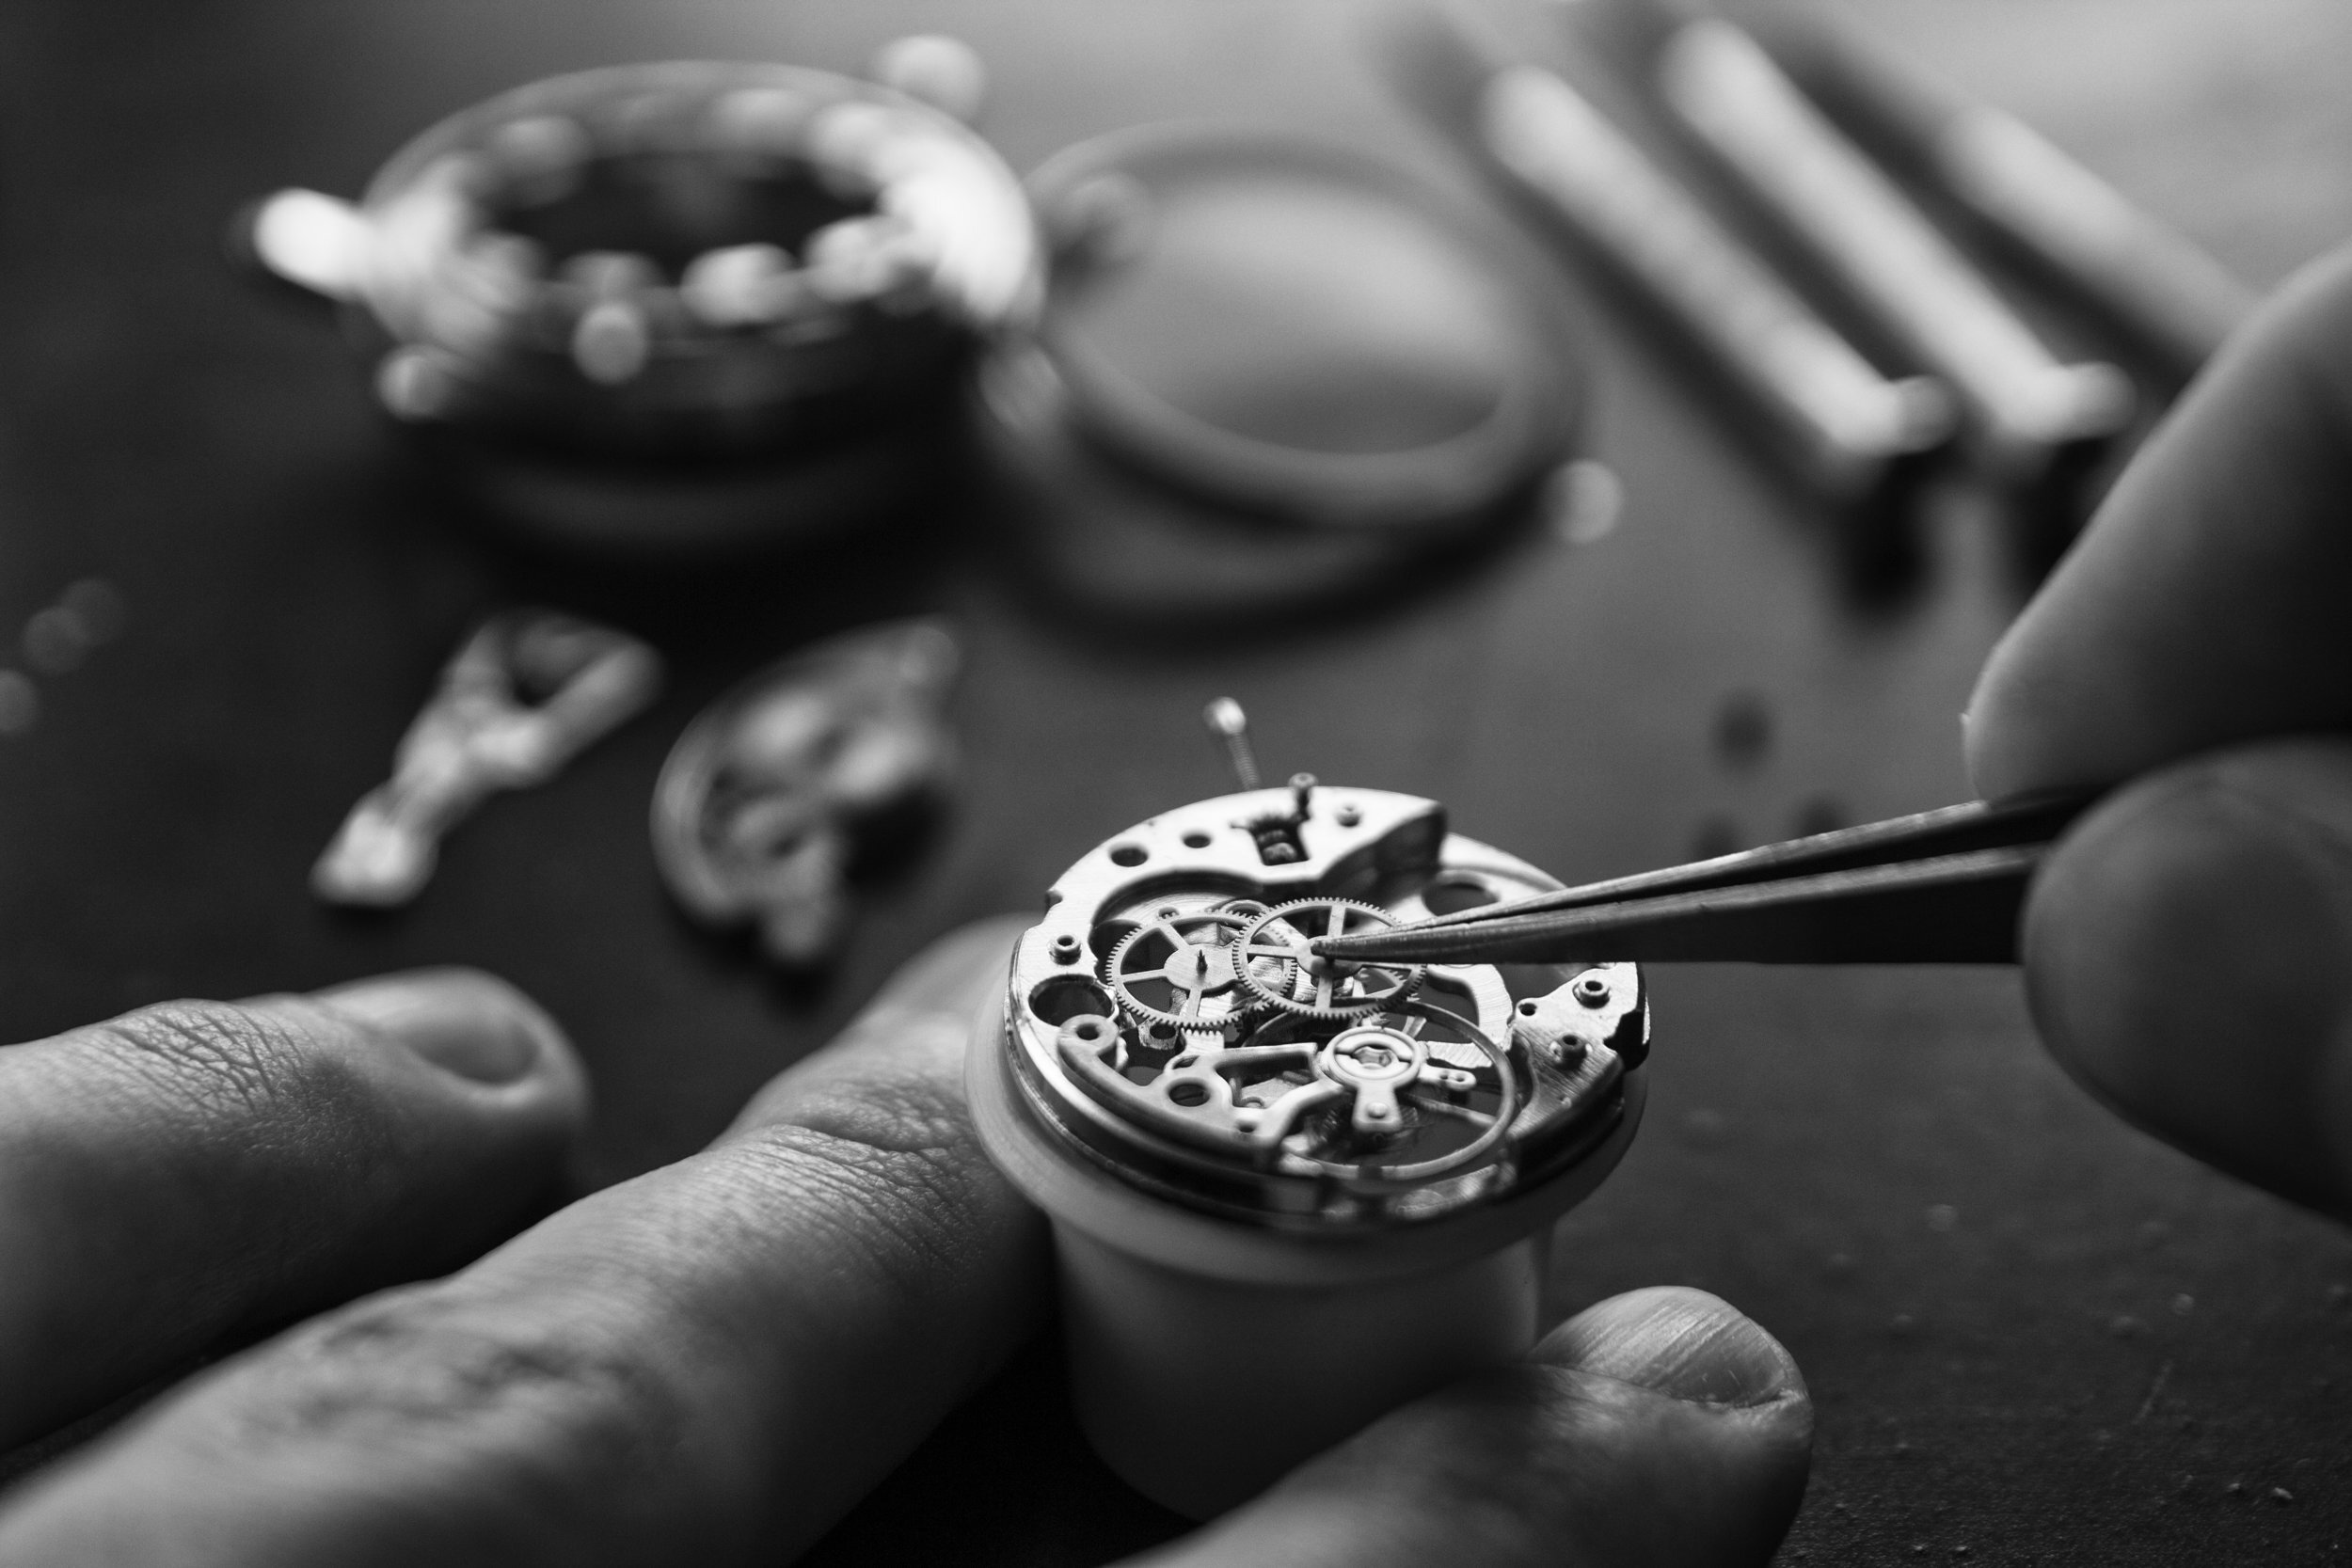 Watch Repairs in Manchester